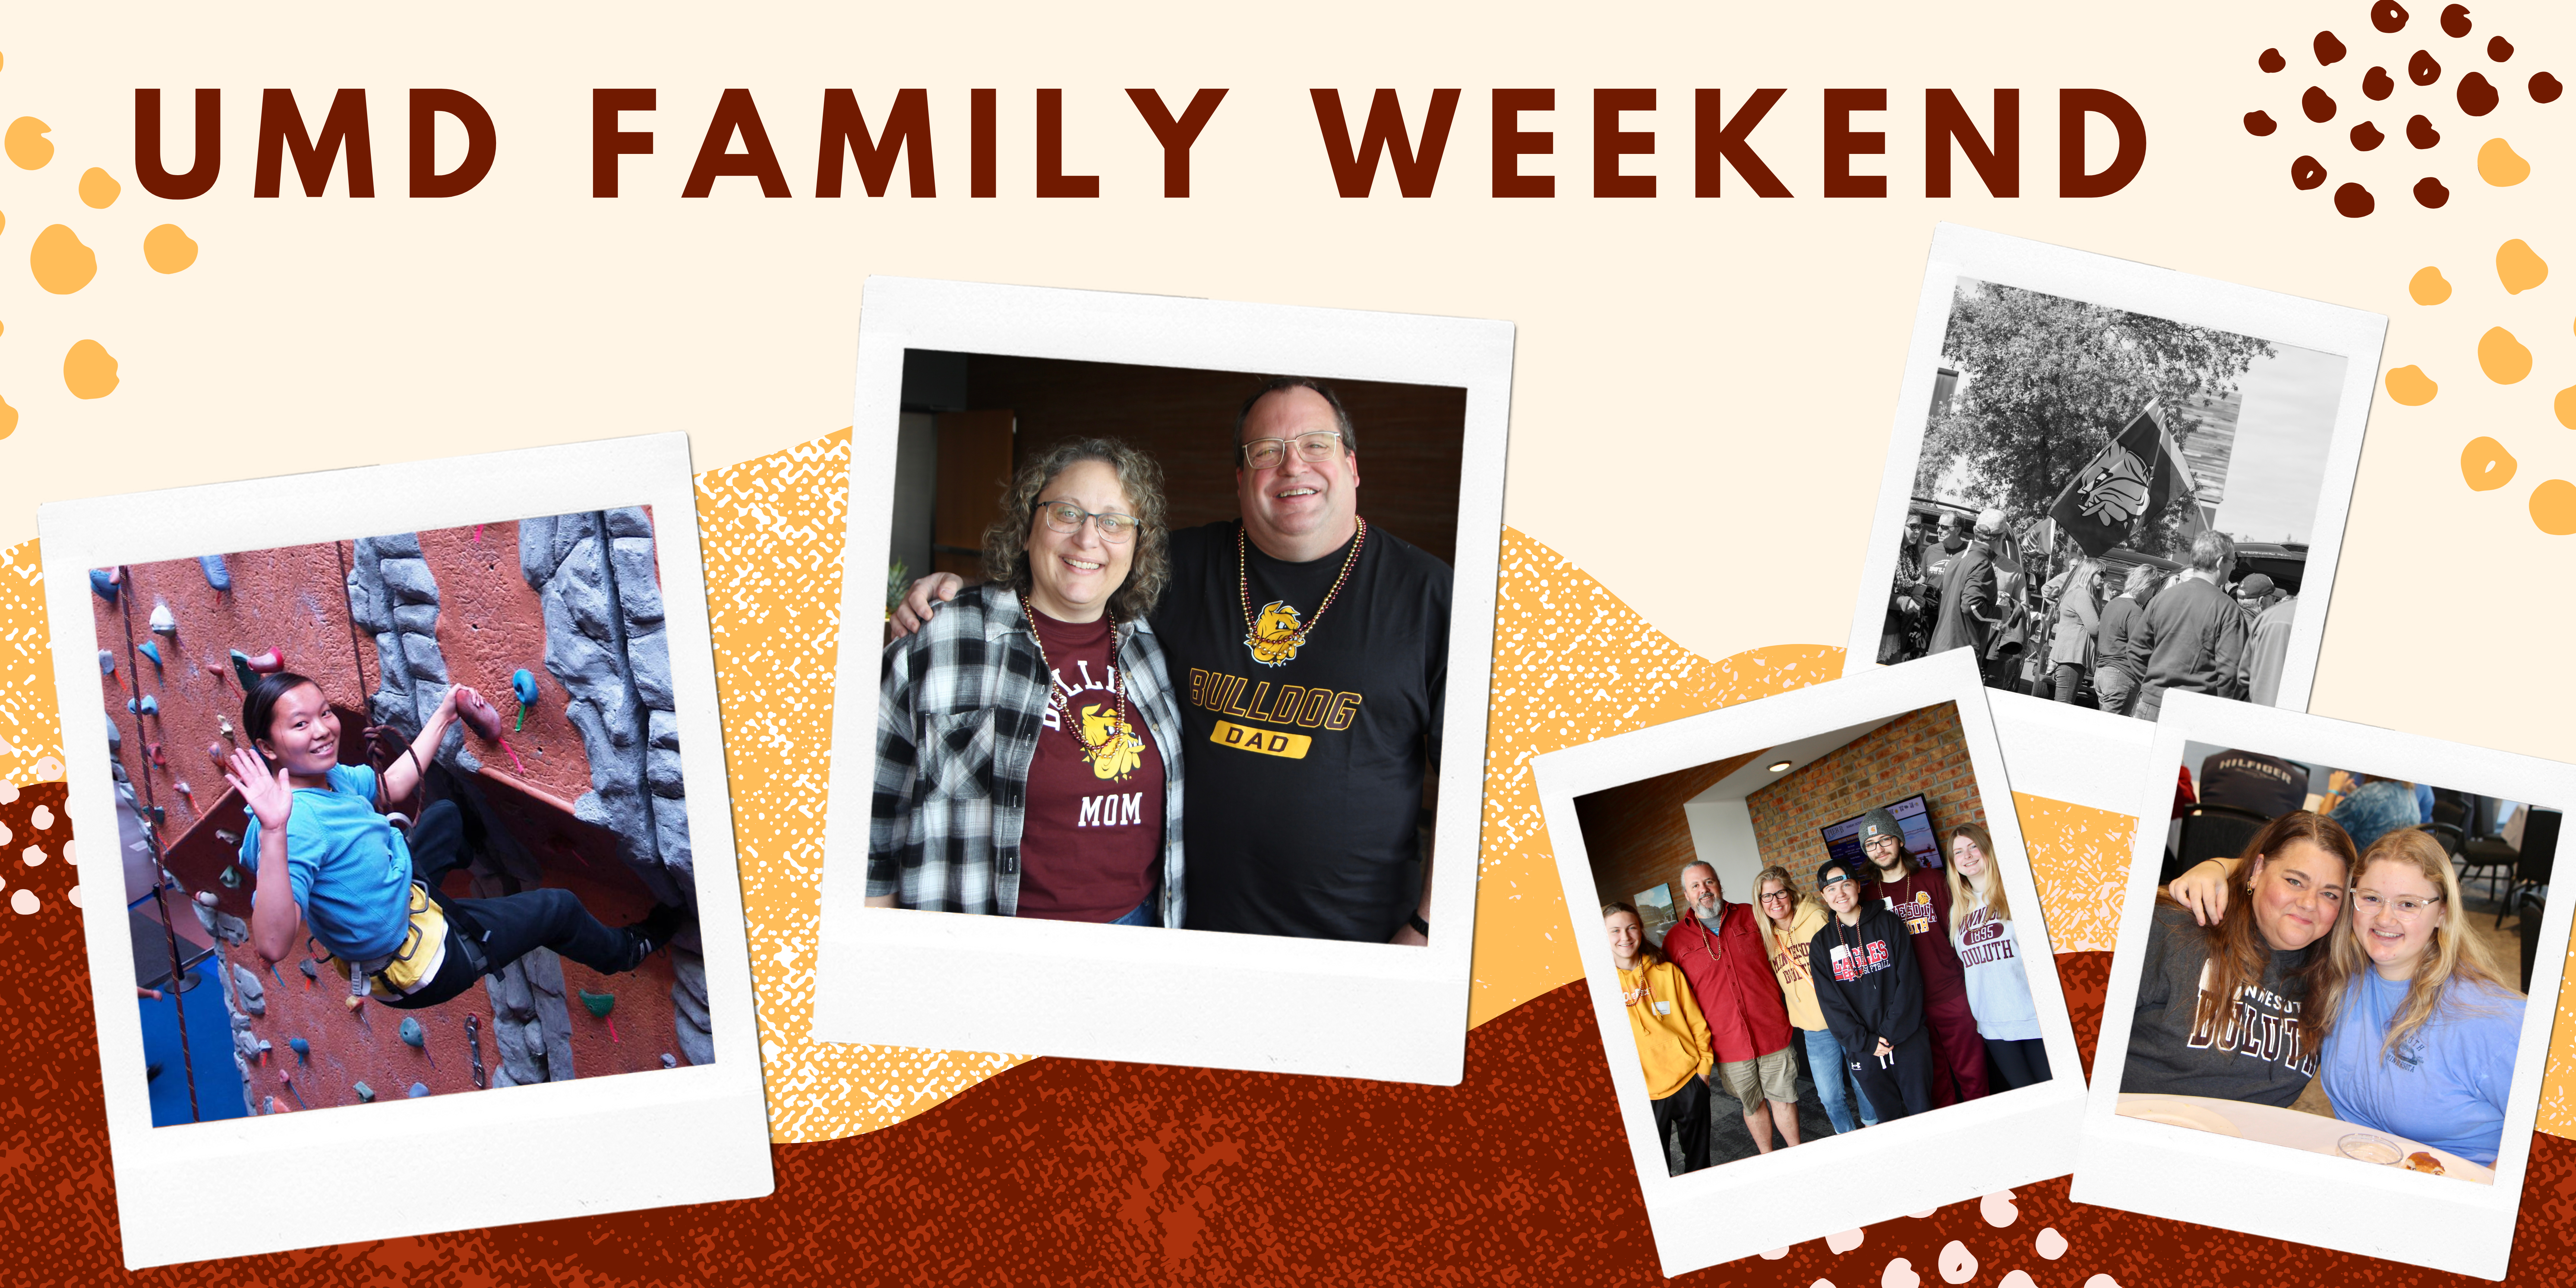 UMD Family Weekend, pictures of people and the events that happened.